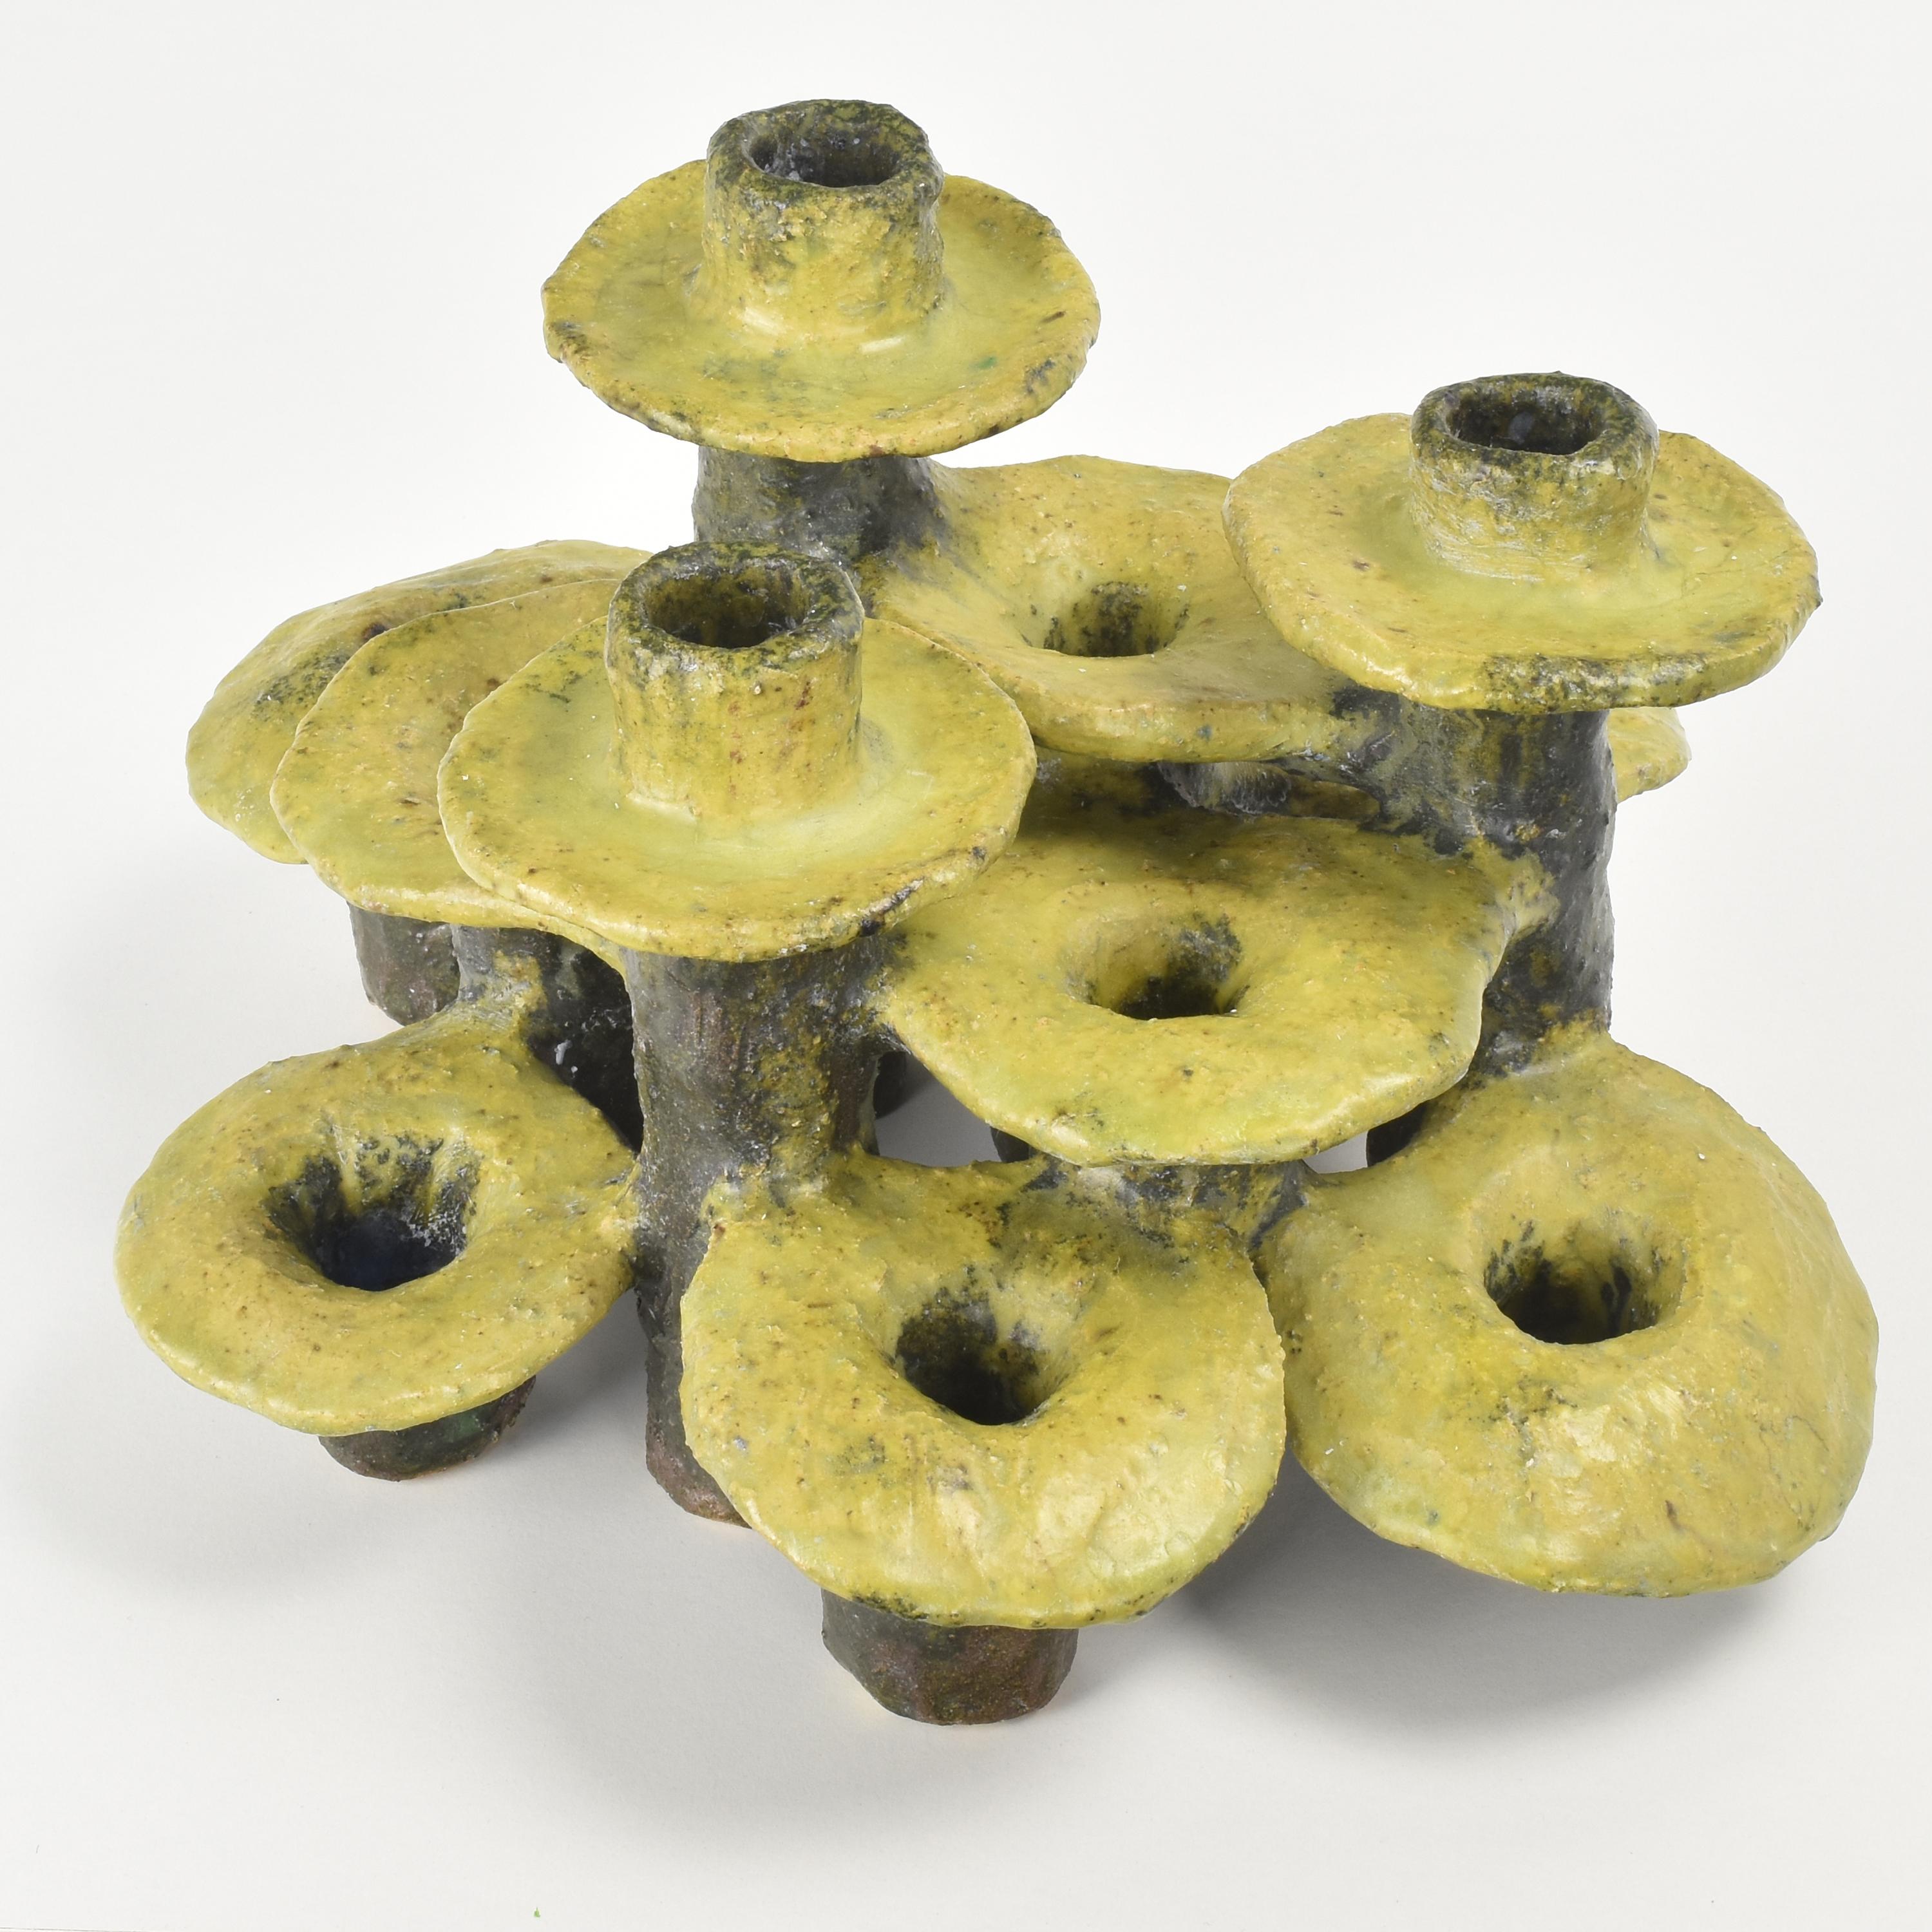 This brutalist object has a unique and creative design, featuring an arrangement of 12 candle holders, each in the shape of a mushroom, arranged in different levels to create a visually appealing composition. The overall look is reminiscent of the